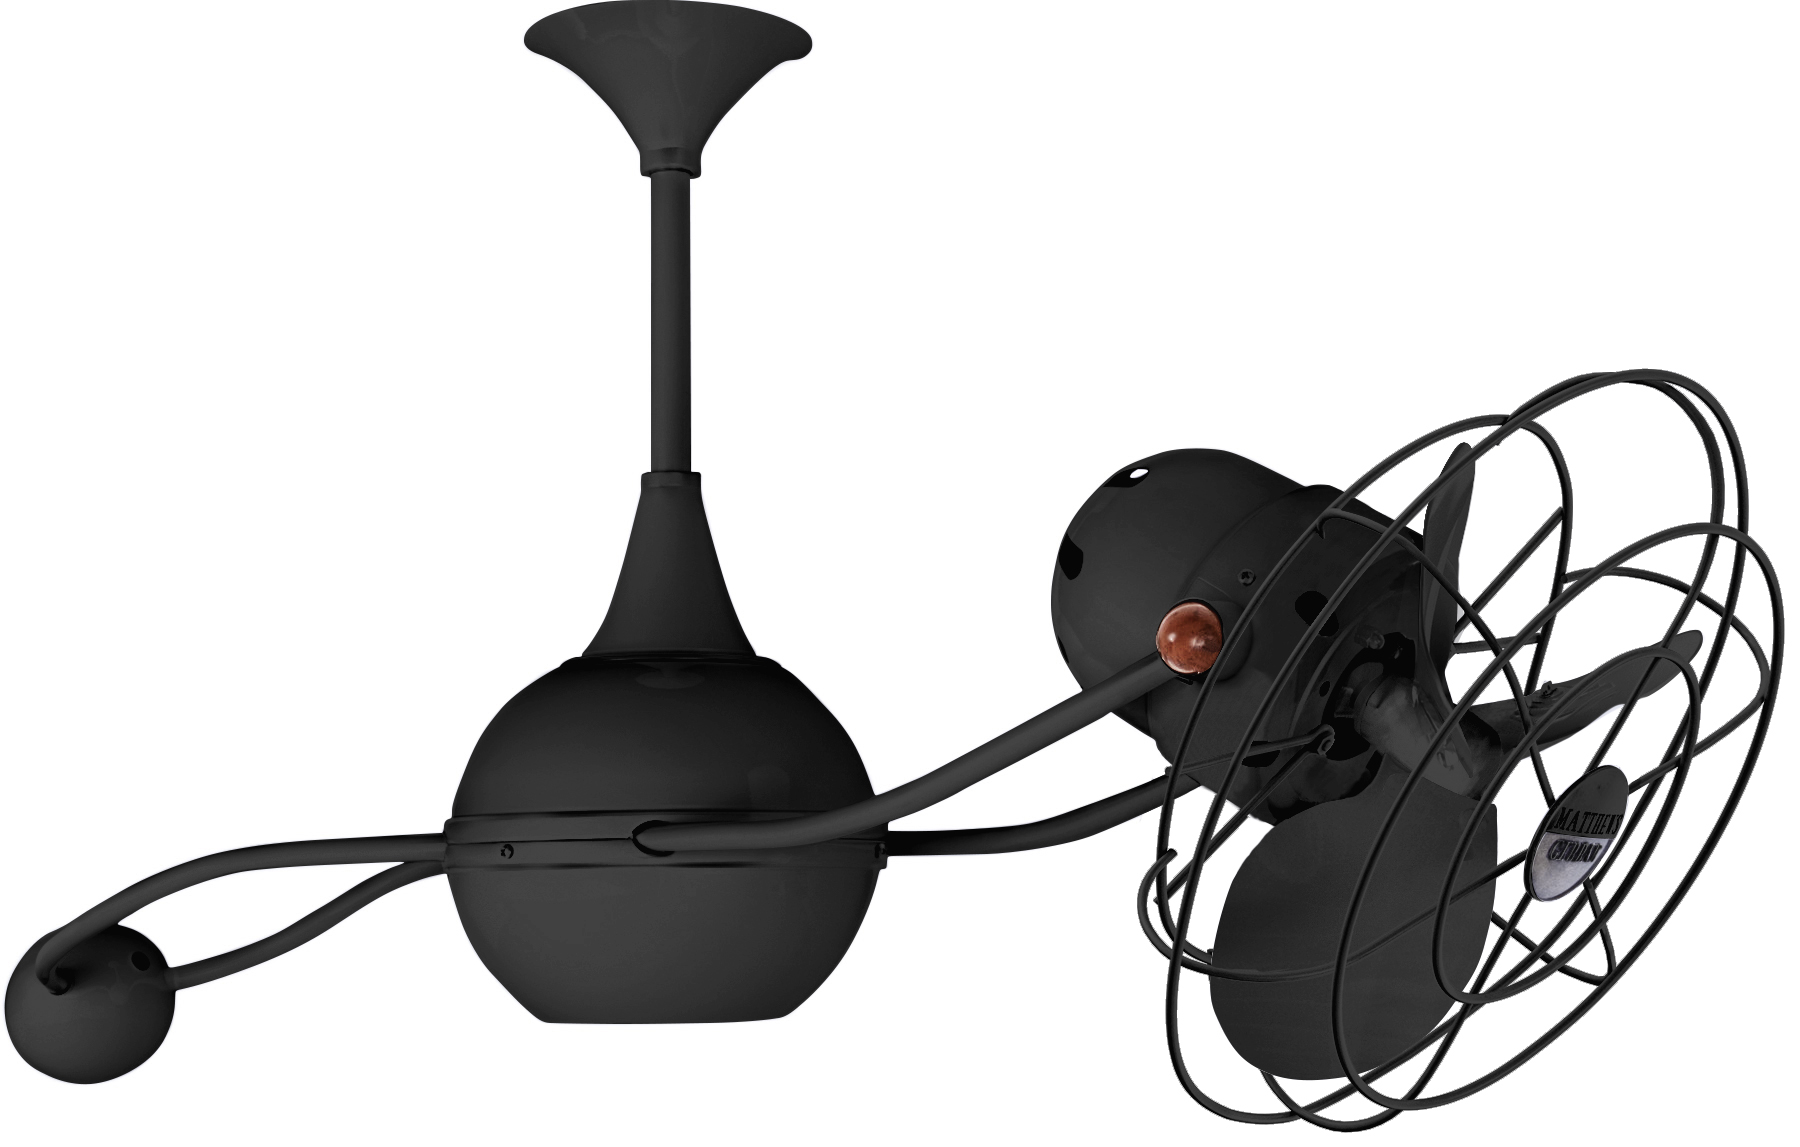 Brisa 2000 ceiling fan in black finish with metal blades in decorative cage made by Matthews Fan Company.